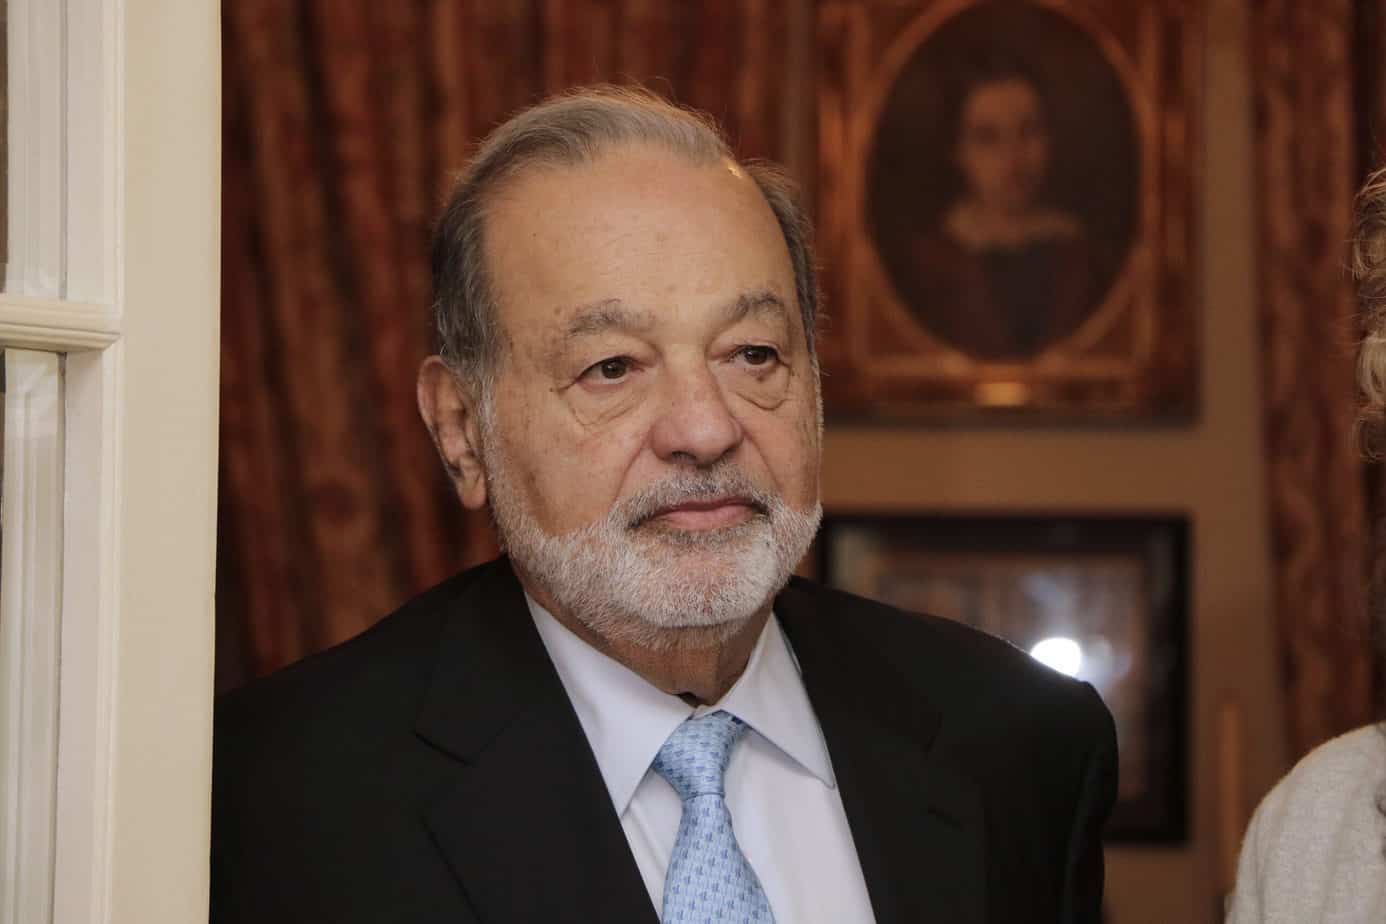 Carlos Slim in an event